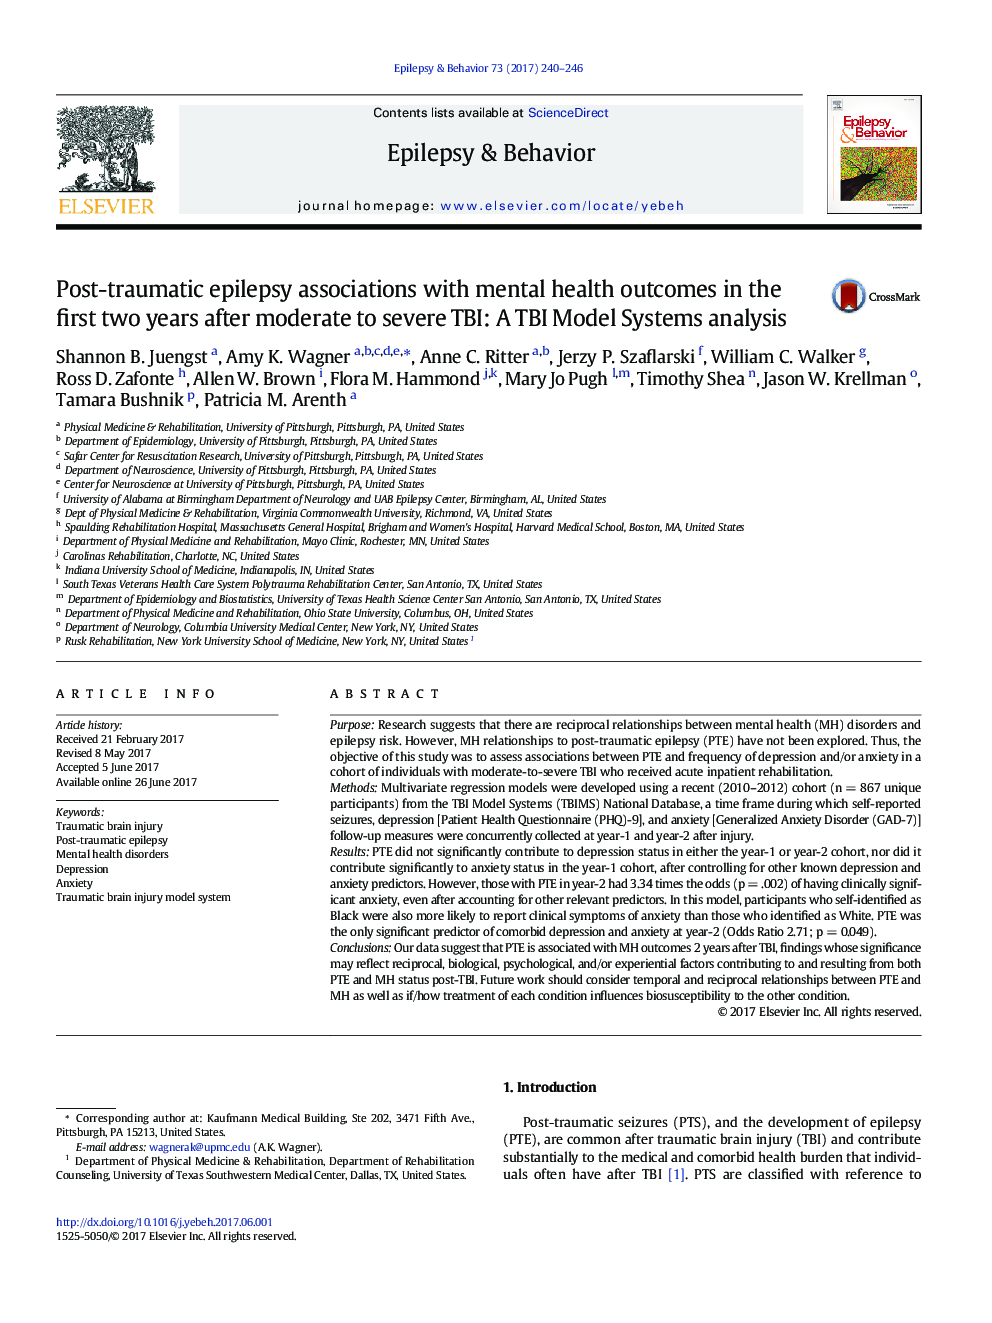 Post-traumatic epilepsy associations with mental health outcomes in the first two years after moderate to severe TBI: A TBI Model Systems analysis